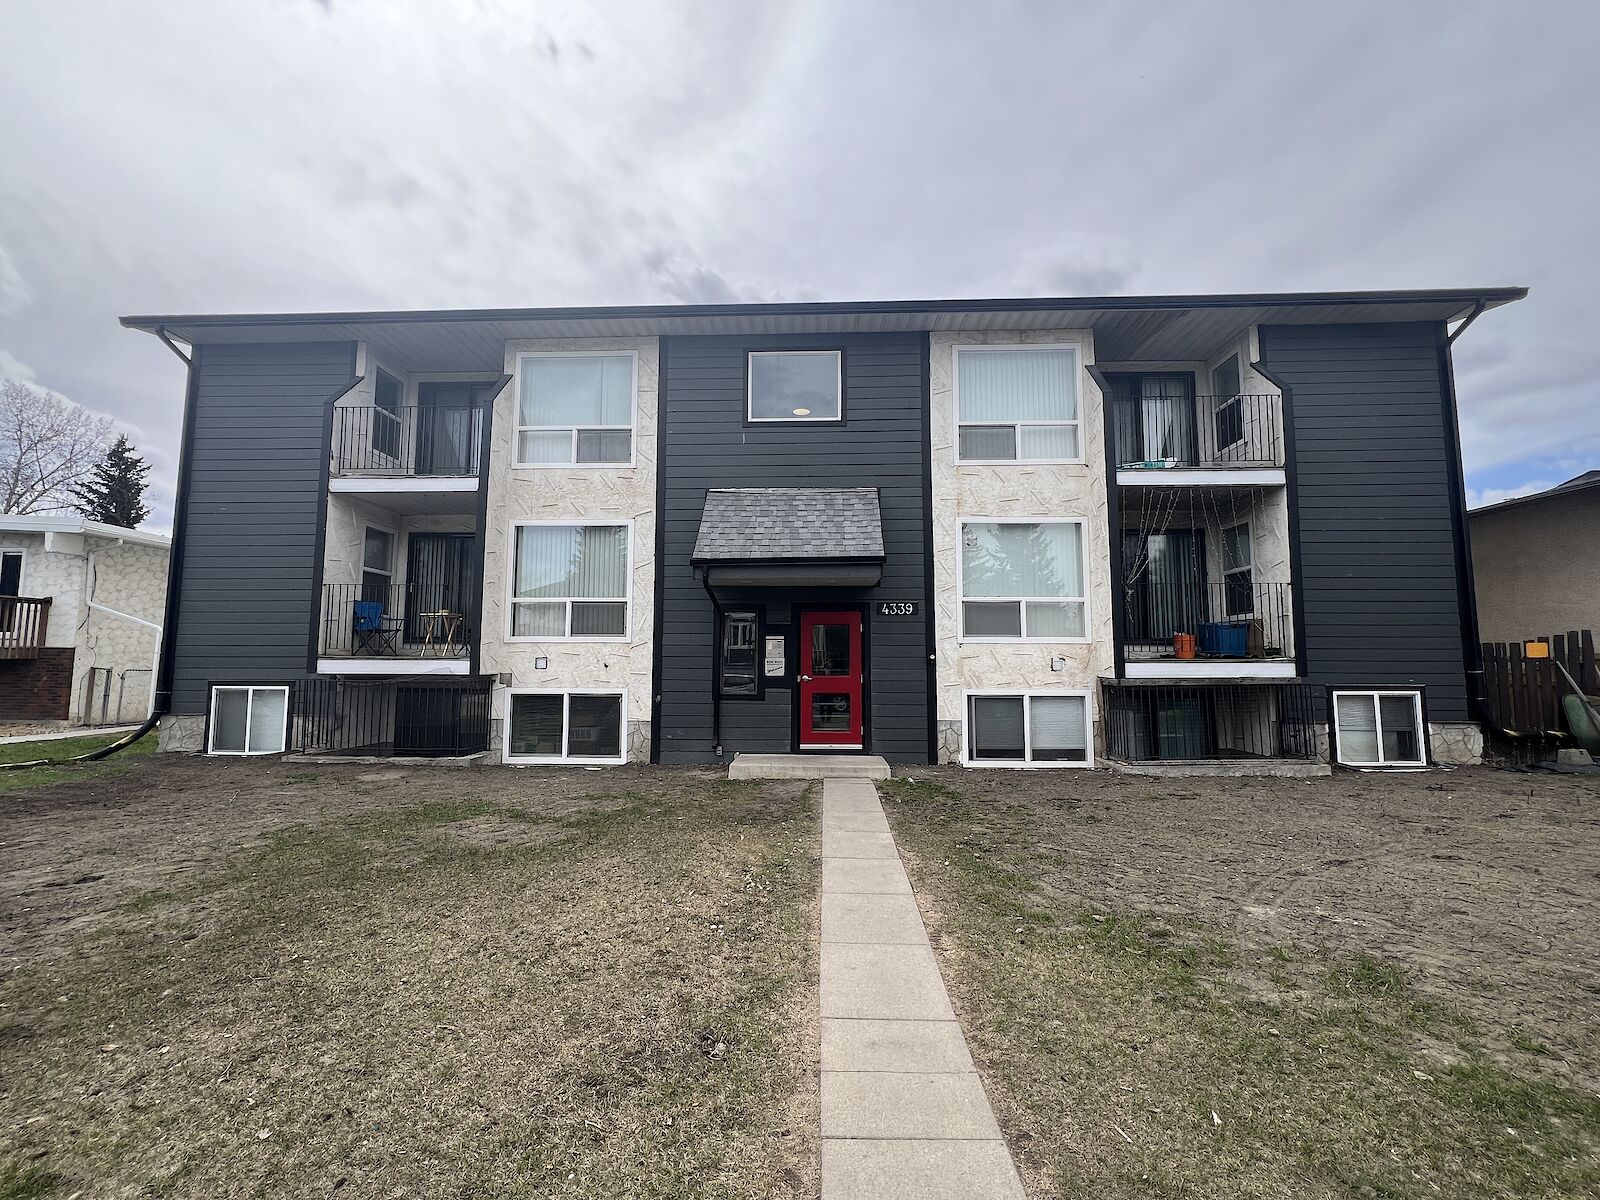 Calgary Pet Friendly Condo Unit For Rent | Bowness | One bedroom unit available on